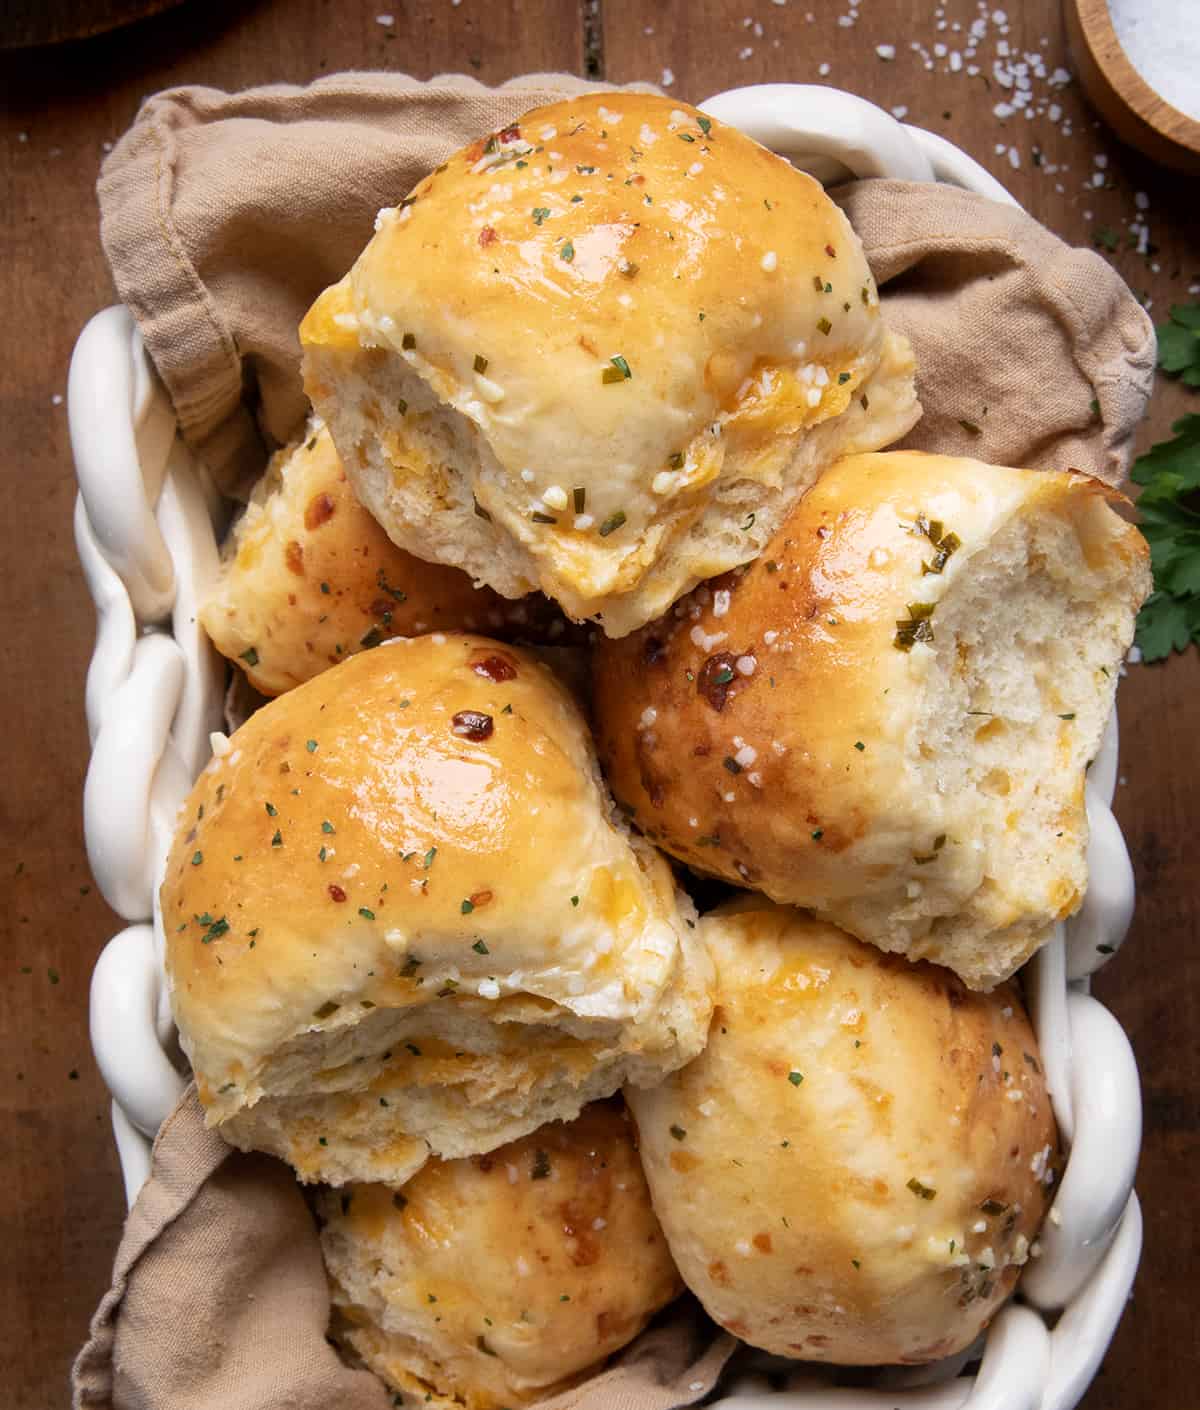 Cheesy Garlic Dinner Rolls in a basket on a wooden table from overhead.